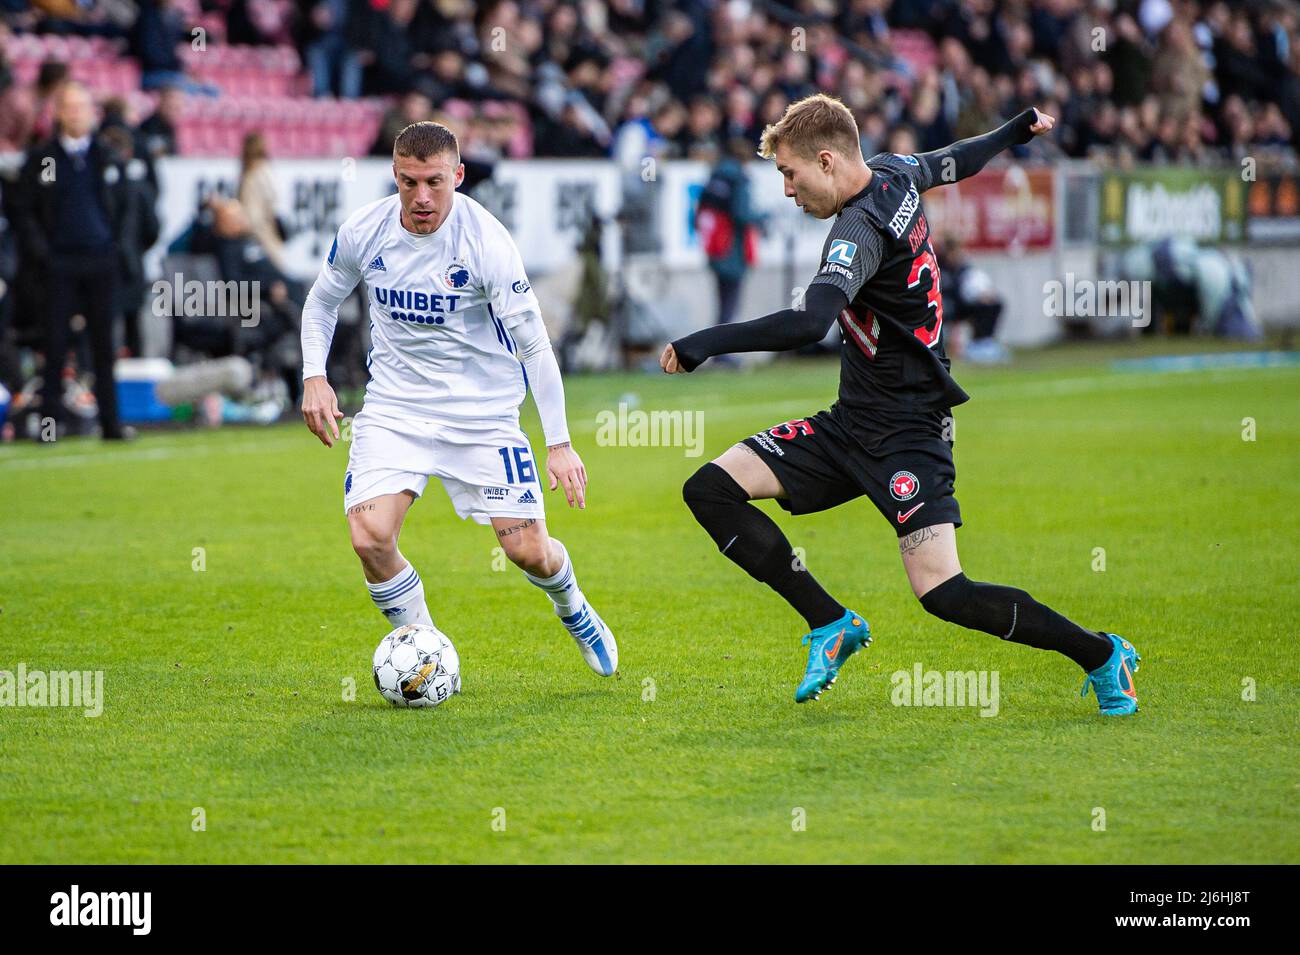 Herning, Denmark. 01st, May 2022. Pep Biel (16) of FC Copenhagen and Charles (35) of FC Midtjylland seen during the 3F Superliga match between FC Midtjylland and FC Copenhagen at MCH Arena in Herning. (Photo credit: Gonzales Photo - Morten Kjaer). Stock Photo